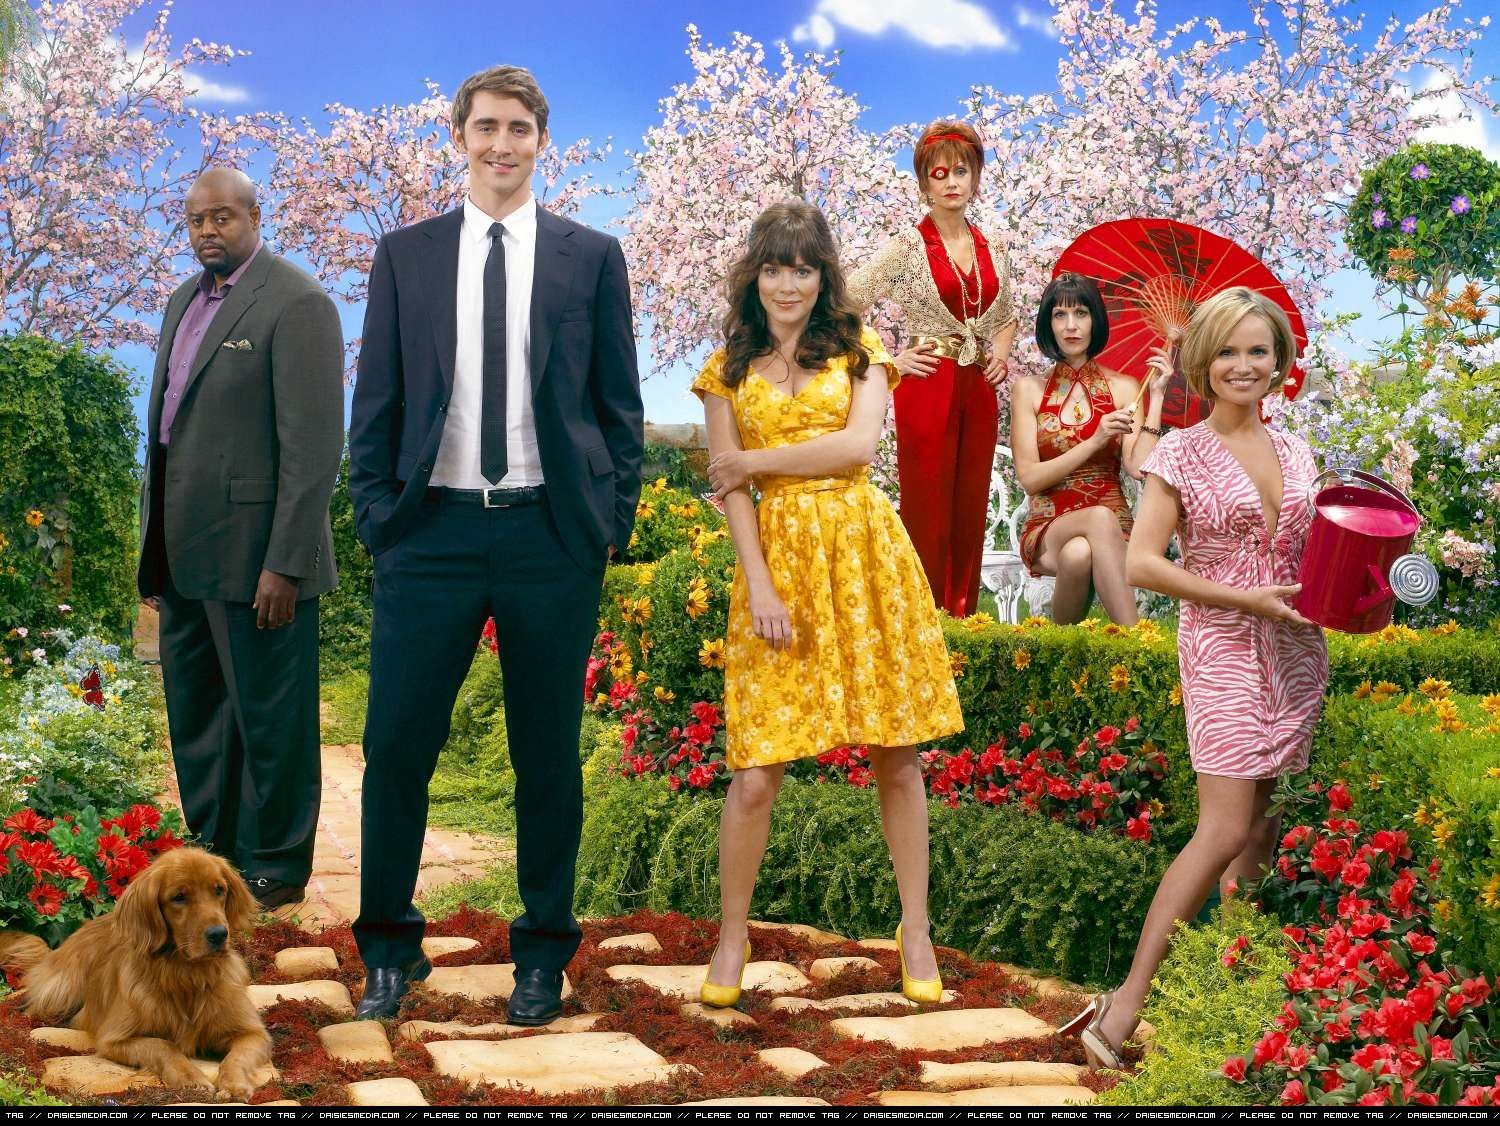 Shows we miss: pushing daisies